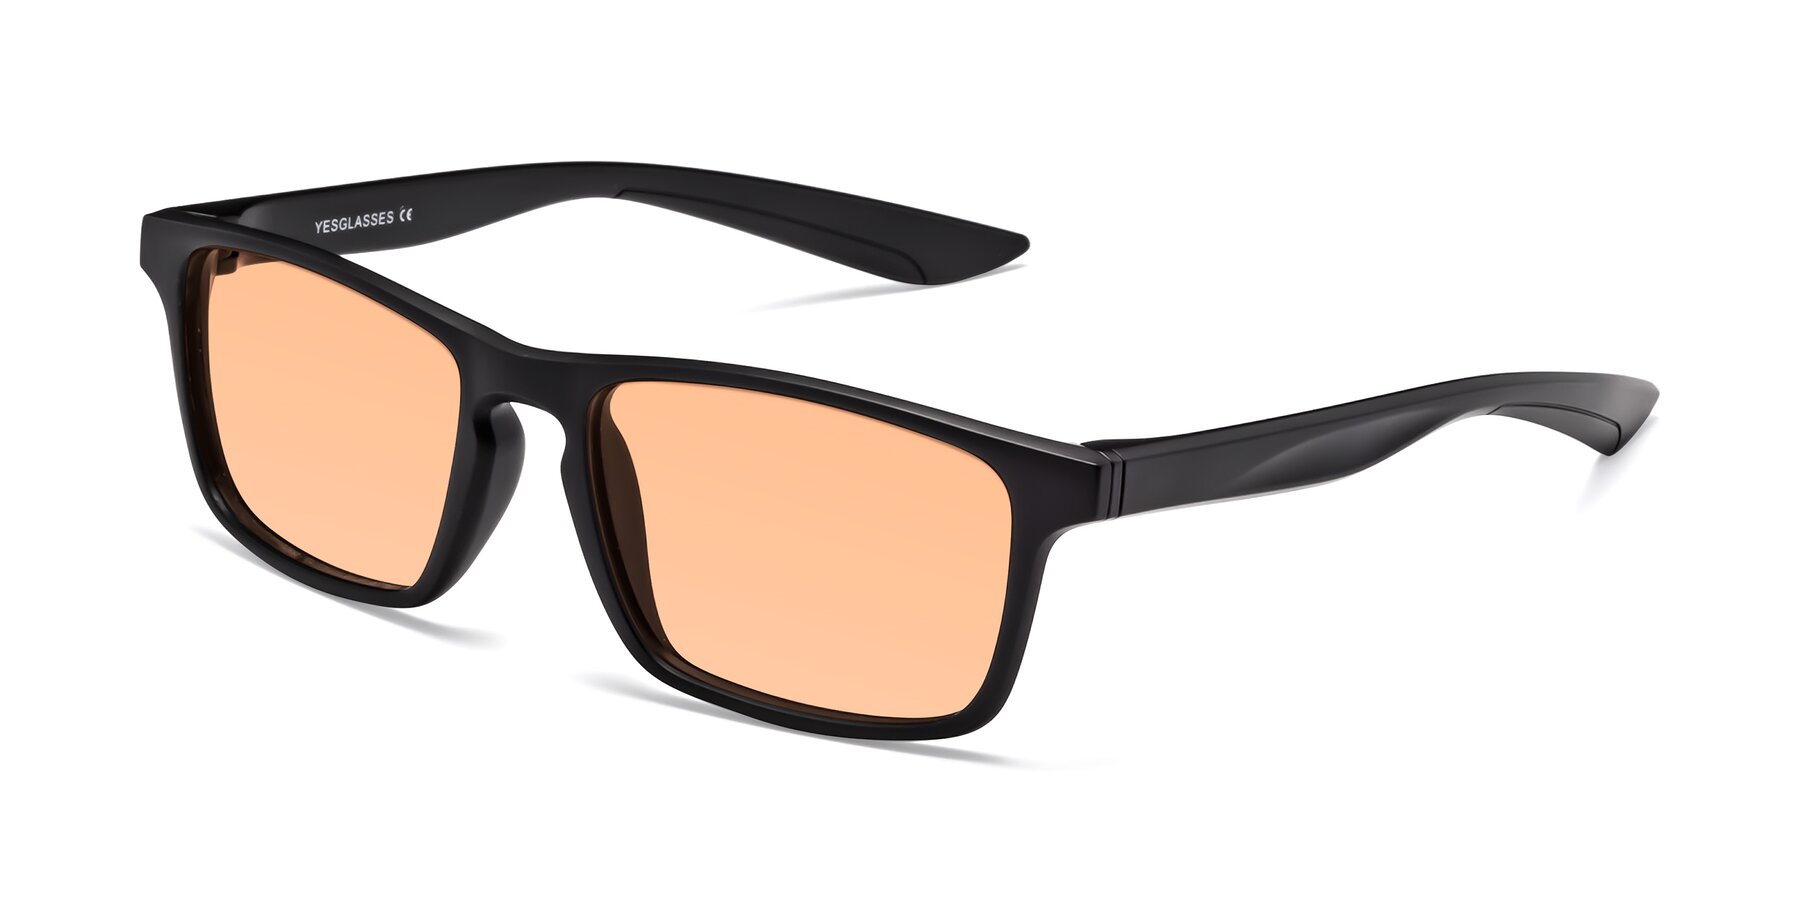 Angle of Passion in Matte Black with Light Orange Tinted Lenses